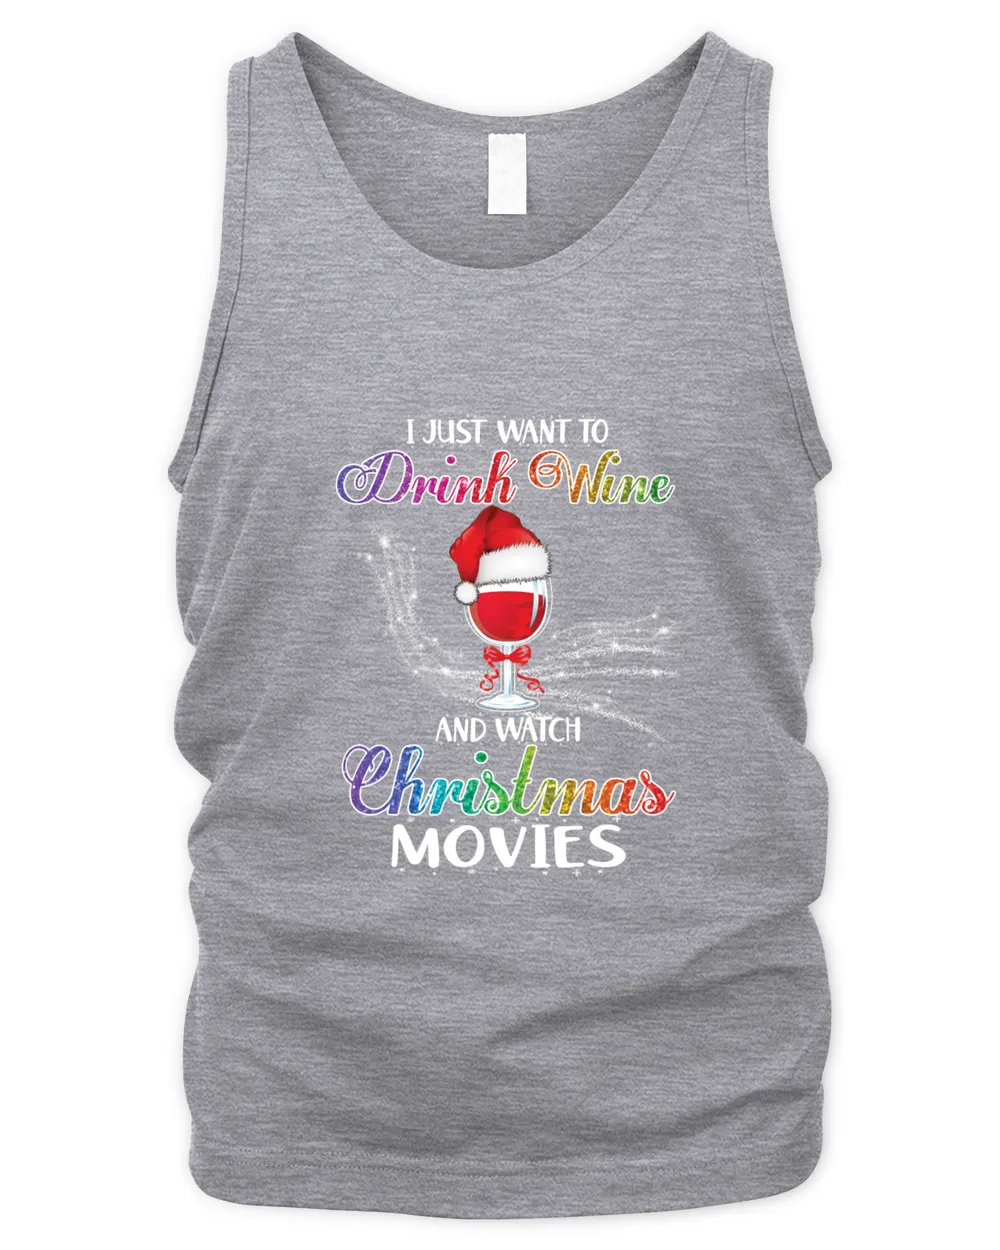 I Just Want To Drink Wine and Watch Christmas Movies Men's Tank Top